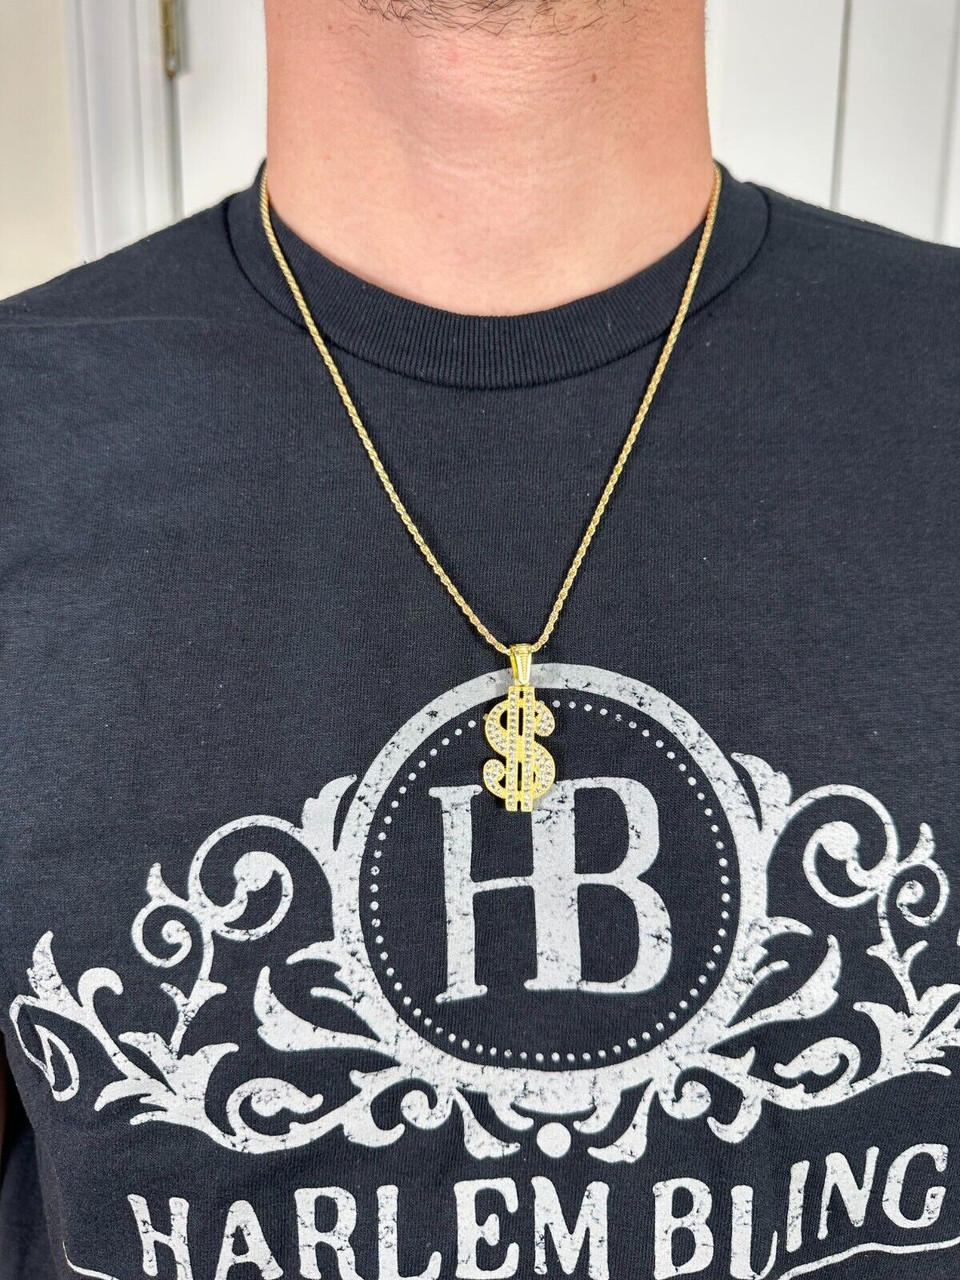 Hip Hop V S Letter Pendant Necklace Gold/silver Color Plated Micro